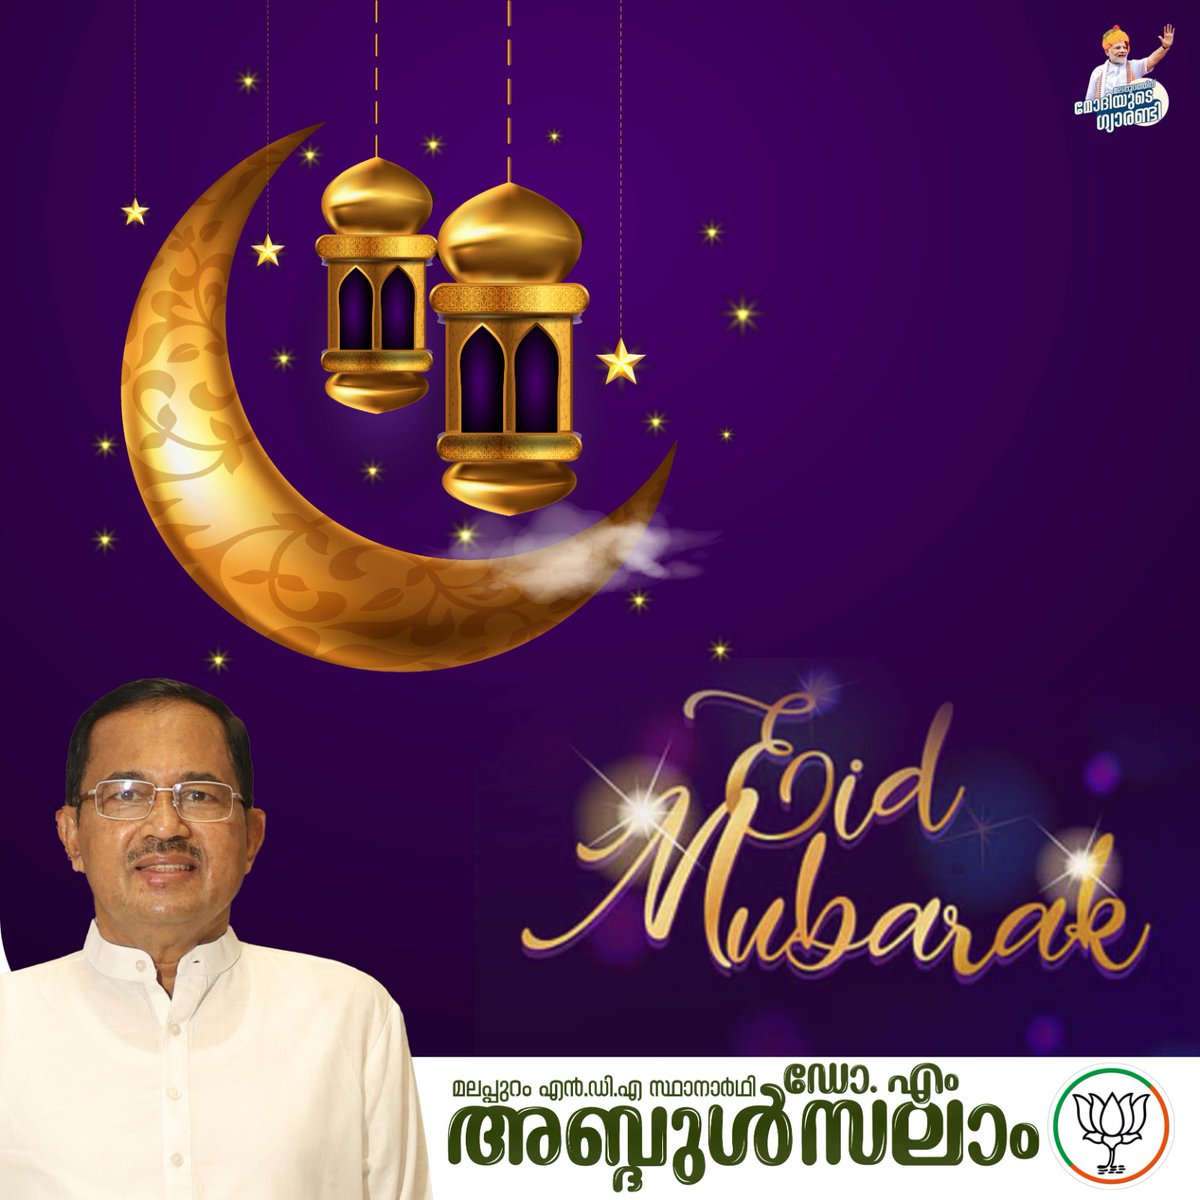 Eid Mubarak! May this blessed occasion fill your heart with joy, your home with warmth, and your life with prosperity.